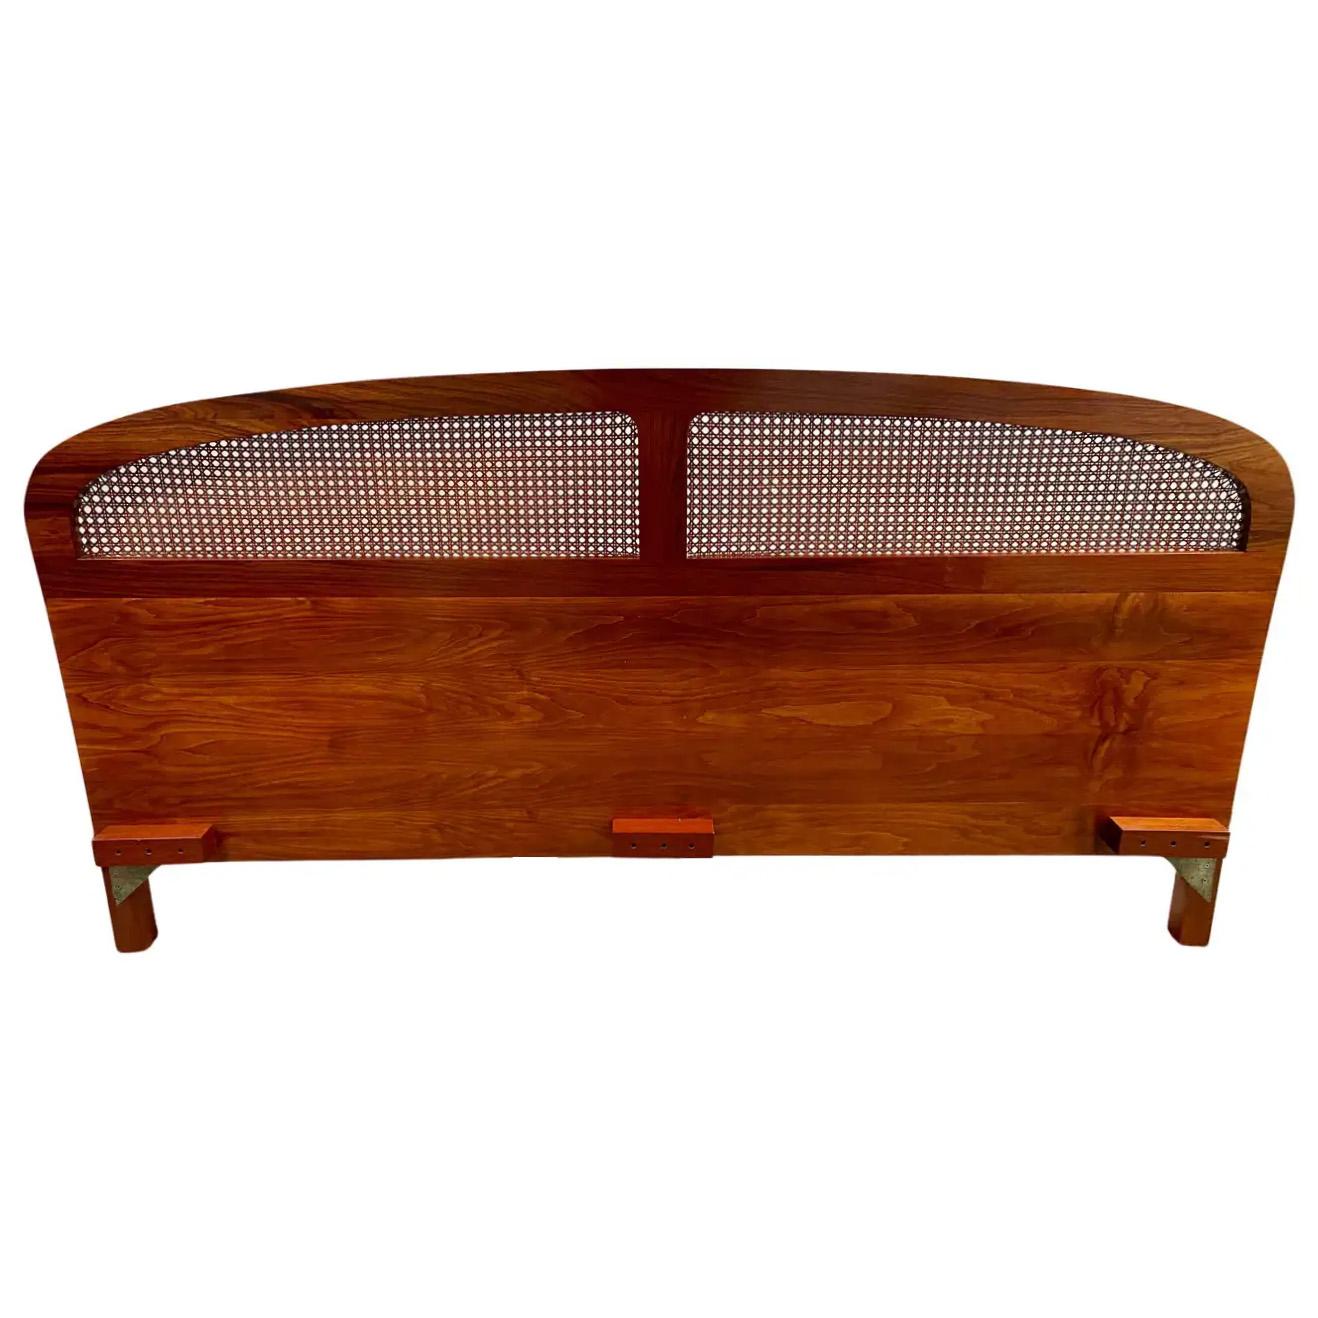 A Mid-Century Modern Queen Size headboard made of quality teak. The headboard feature two caned panels and stylish curvy shape adding charm to its design. Sturdy and finely made, the headboard simplicity and elegance will elevate the design of any